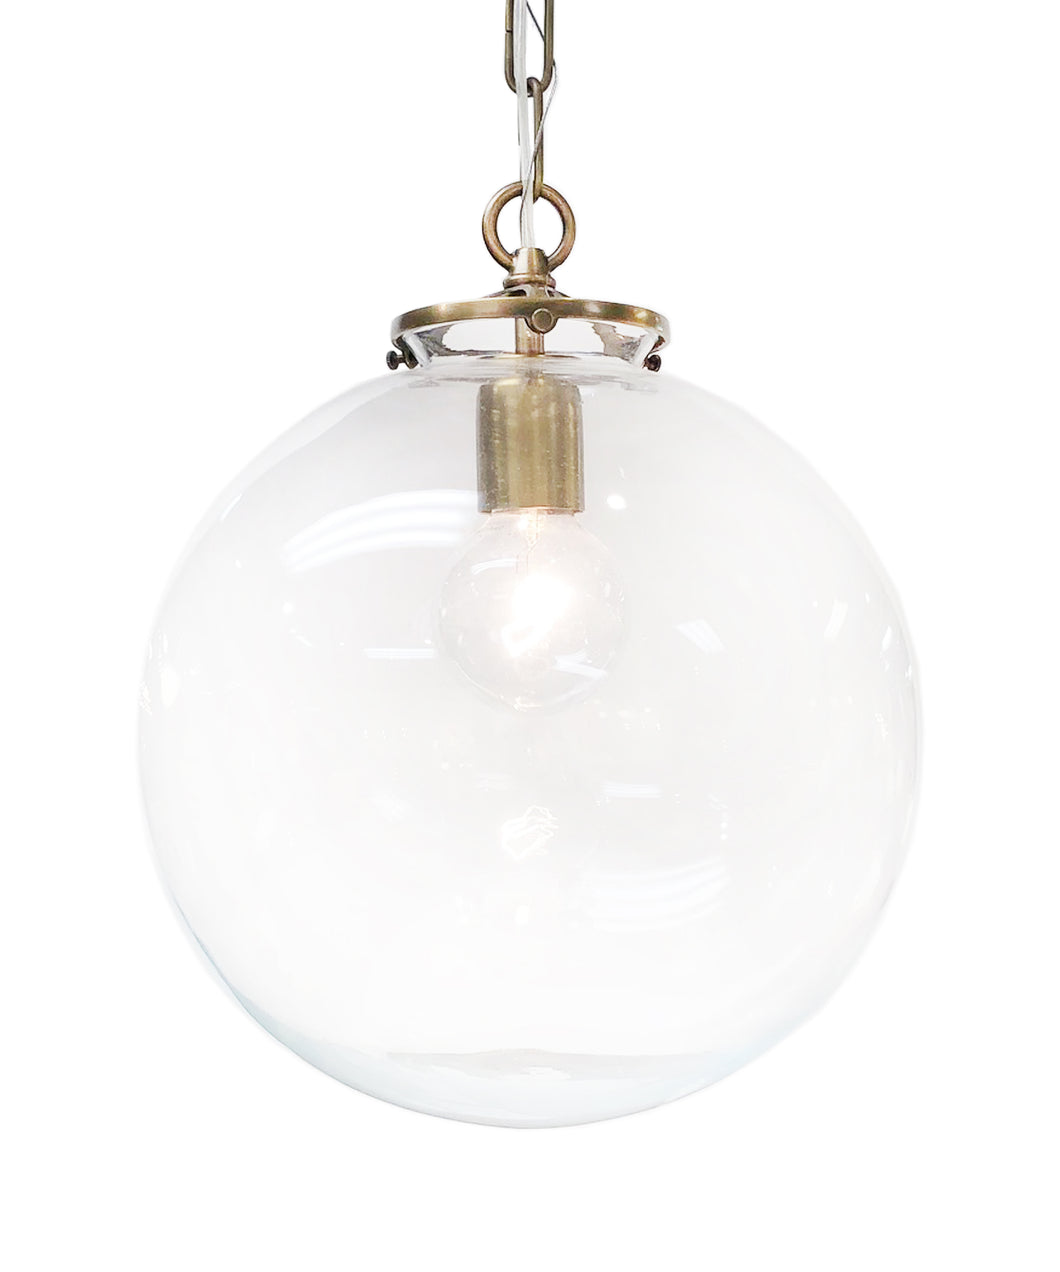 Beaumont Globe Pendant, Hand-Rubbed Antique Brass with Clear Glass